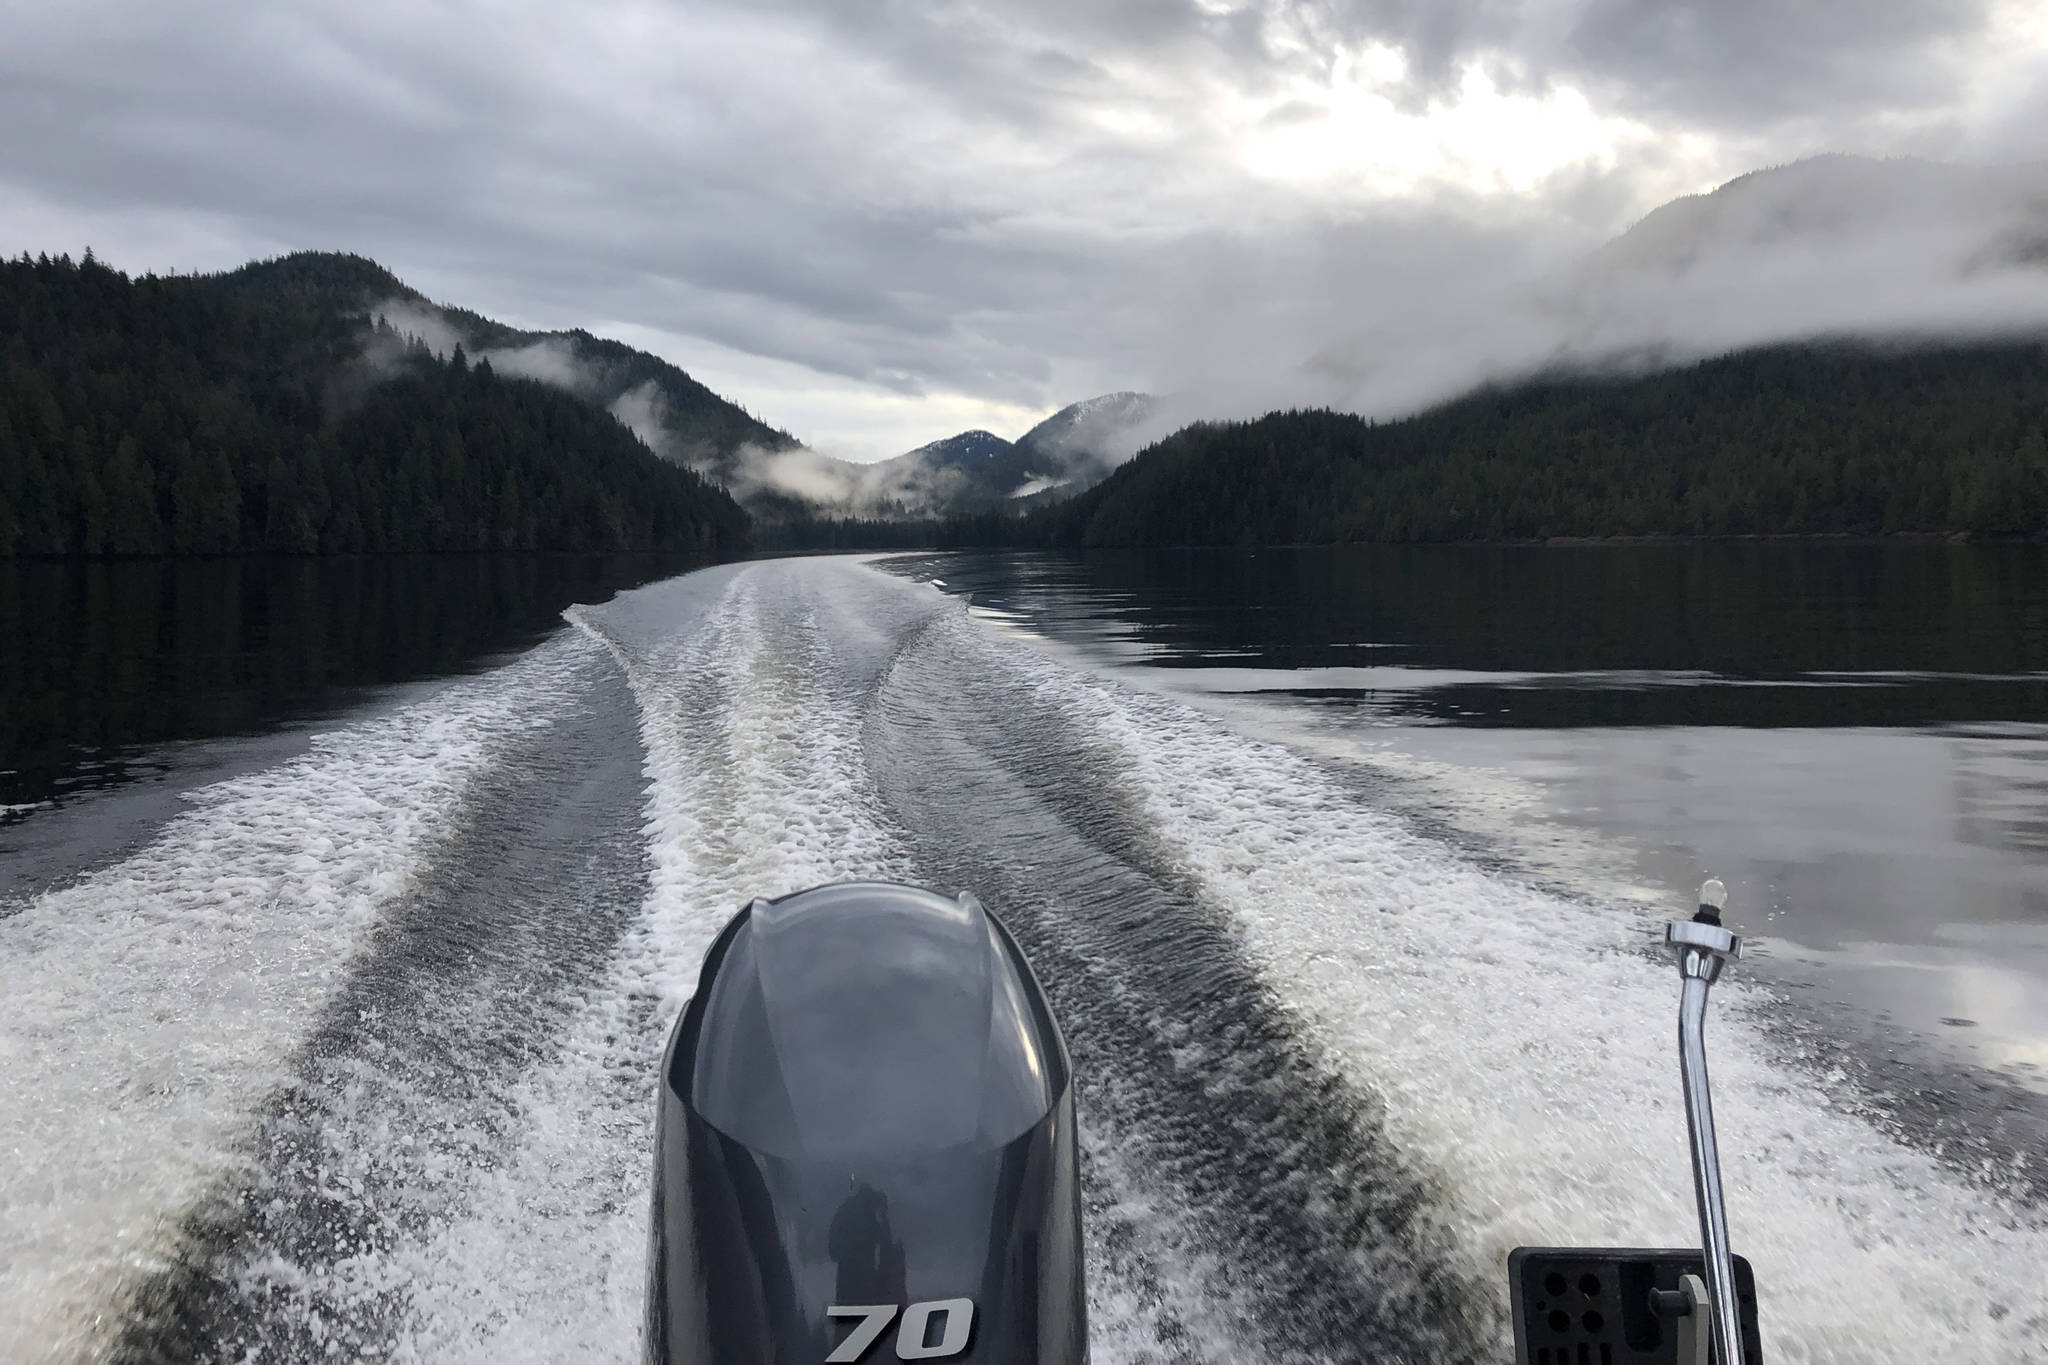 Despite the cold and wet winter water program, the author only recently considered a $350 flotation jacket as a better means of protection than a simple $40 life jacket. (Jeff Lund | For the Juneau Empire)